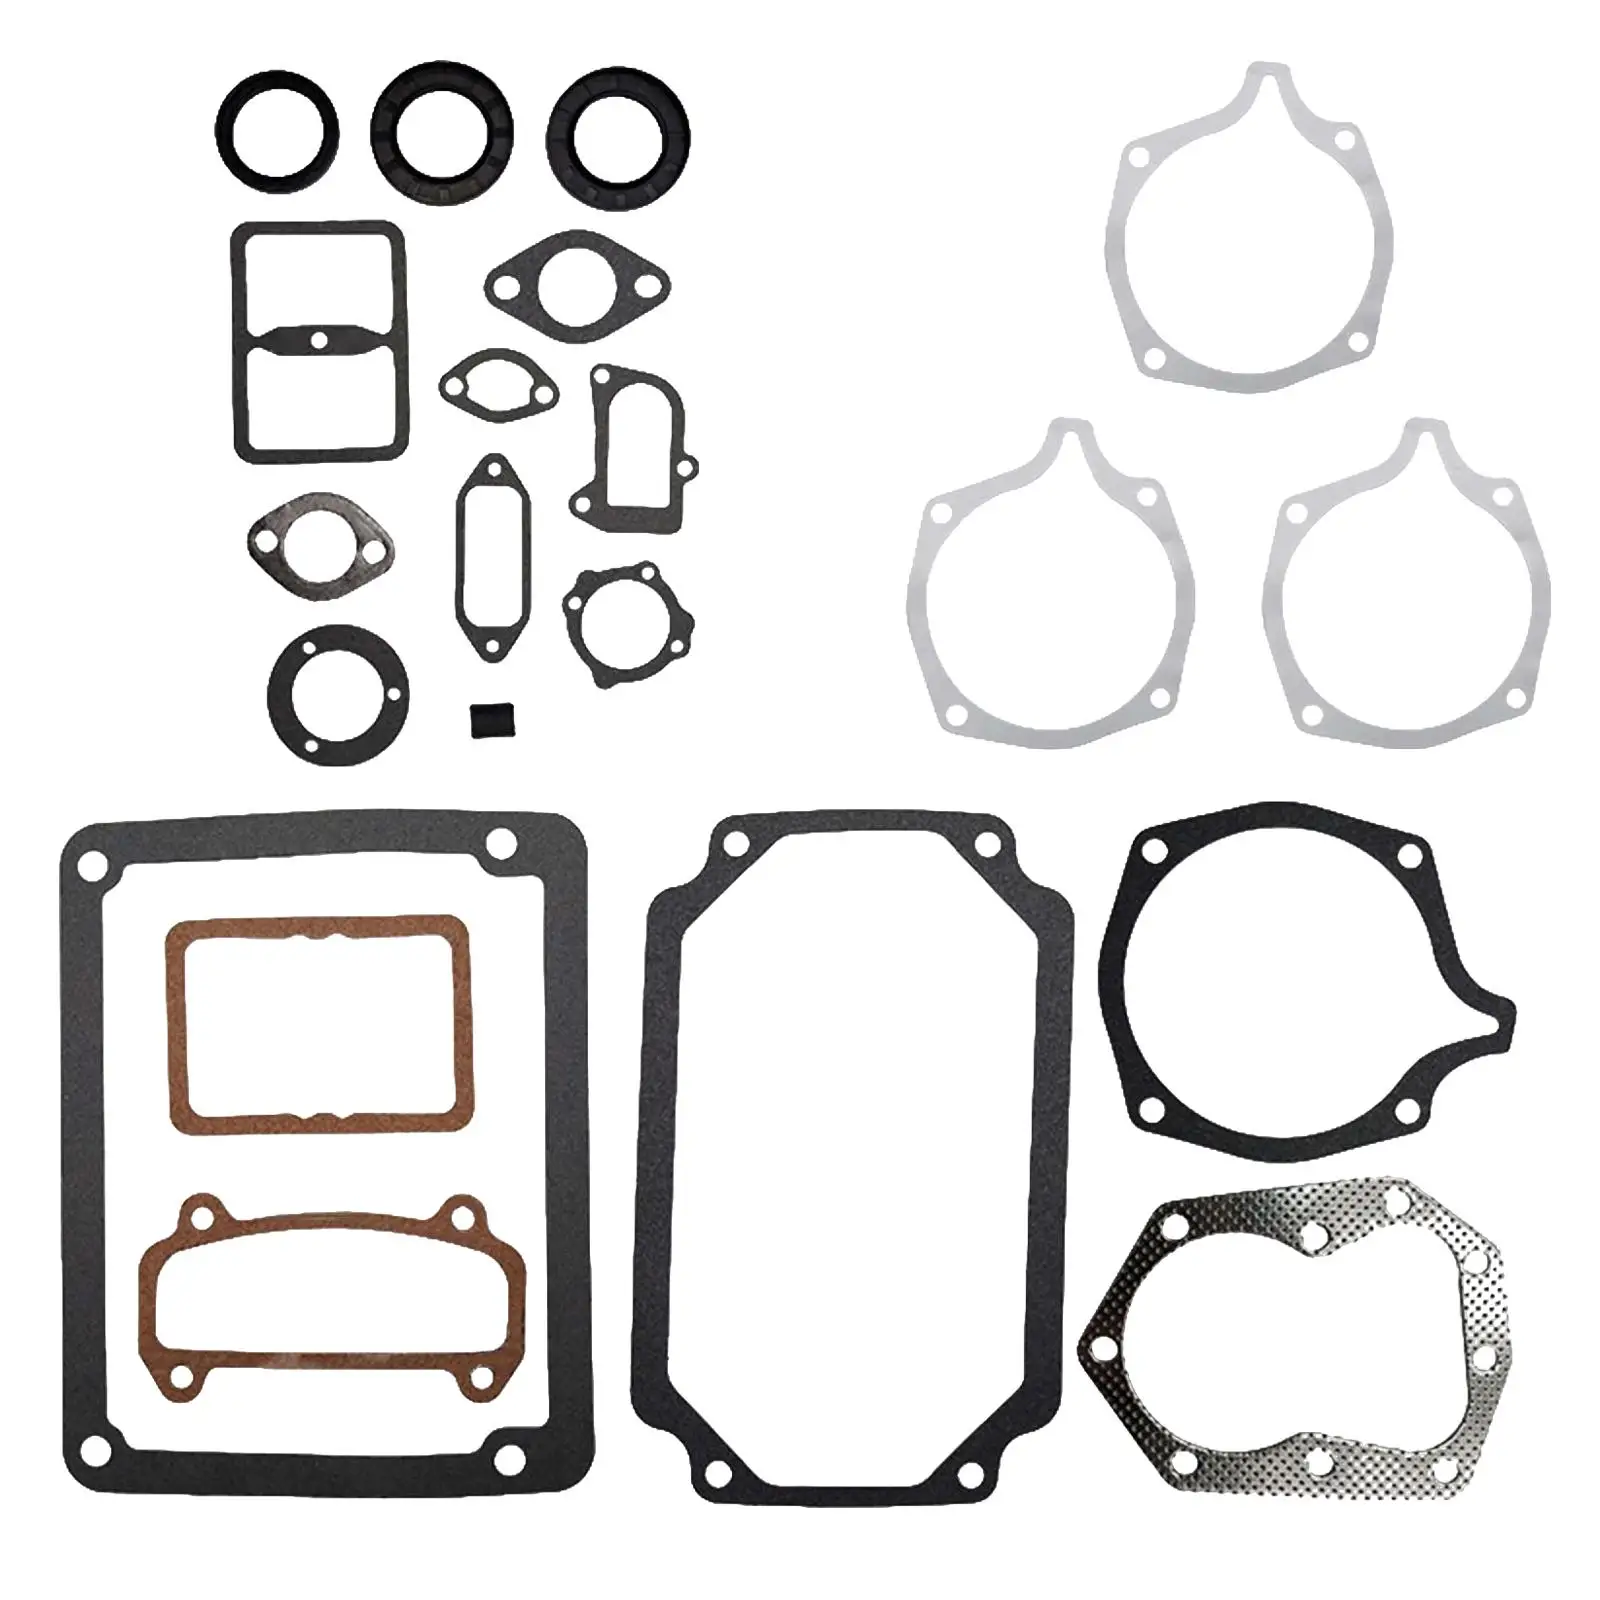 47 755 08-S Gasket Set Replacement Silver for  K241  Mowers 10 12 14 HP Engines Horticulture Garden Lawn